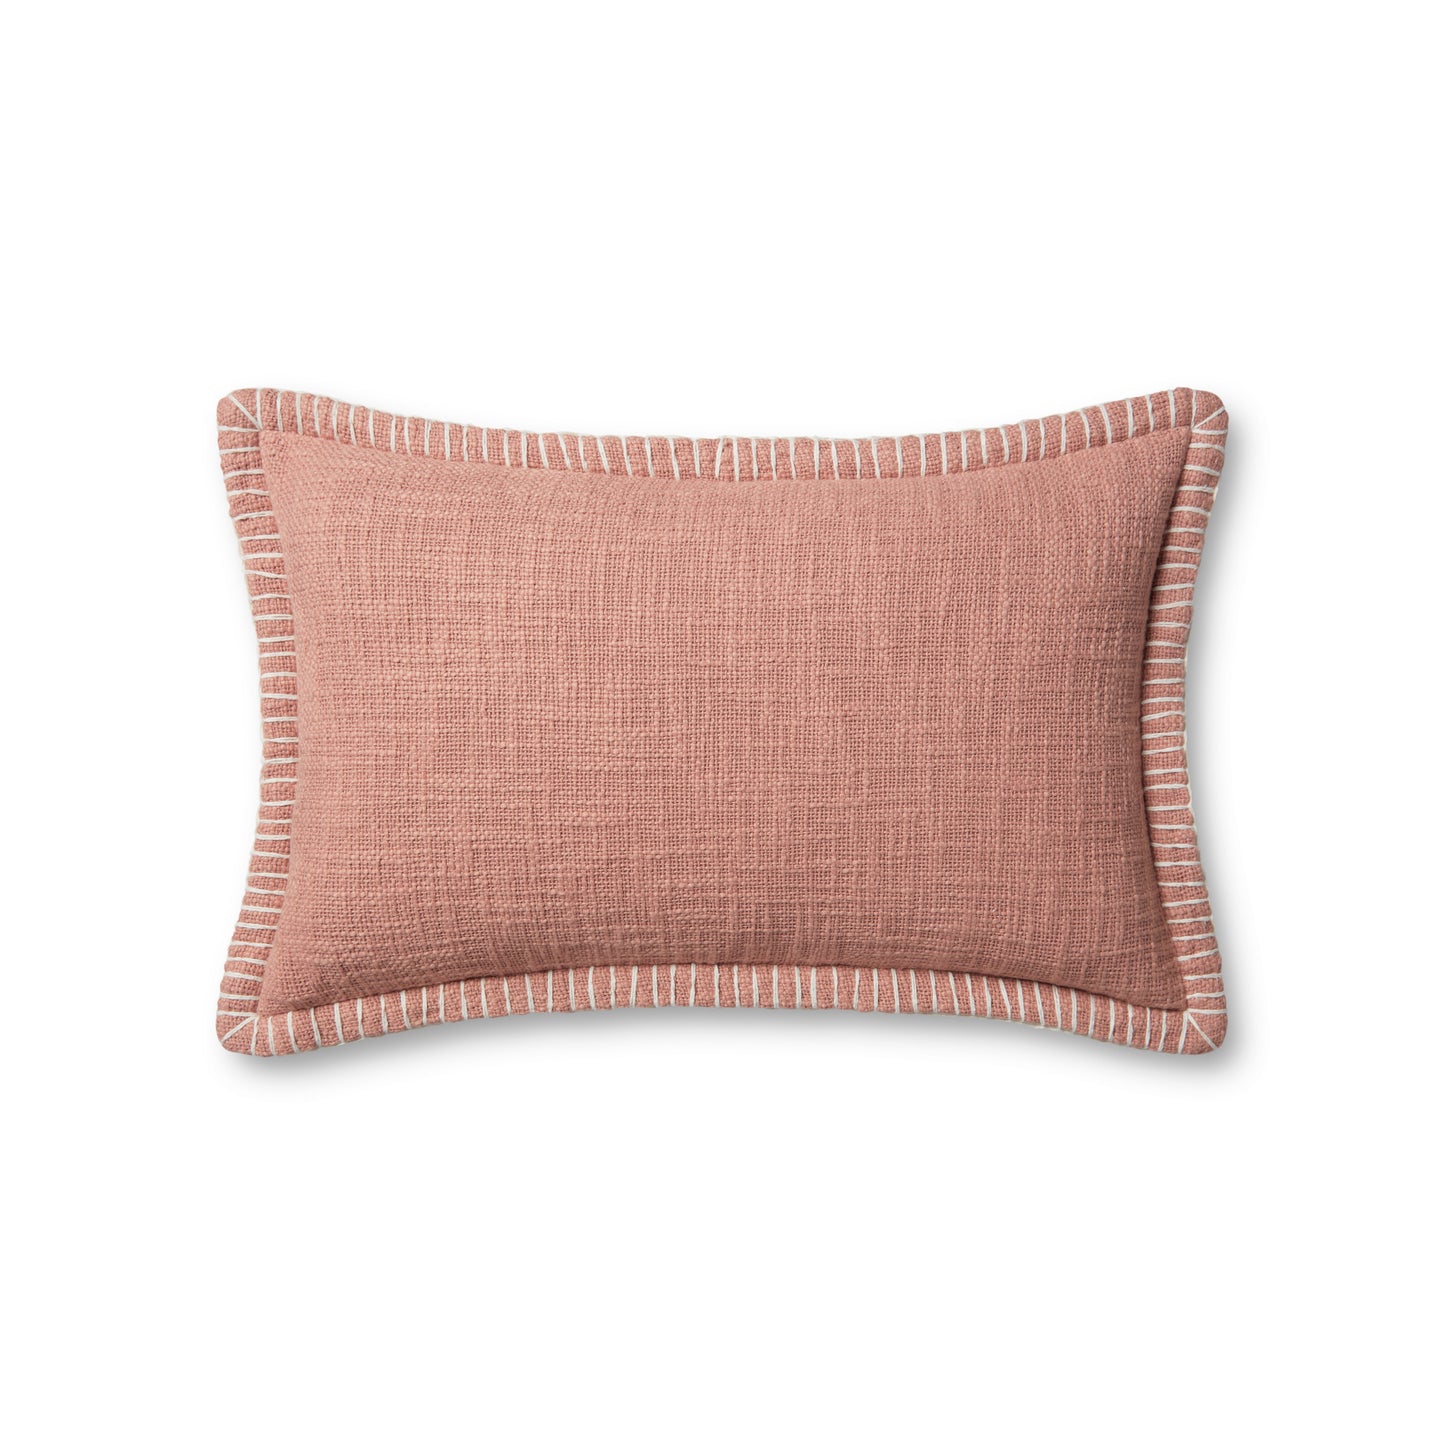 Photo of a pillow;  PLL0109 Pink 13'' x 21'' Cover w/Poly Pillow